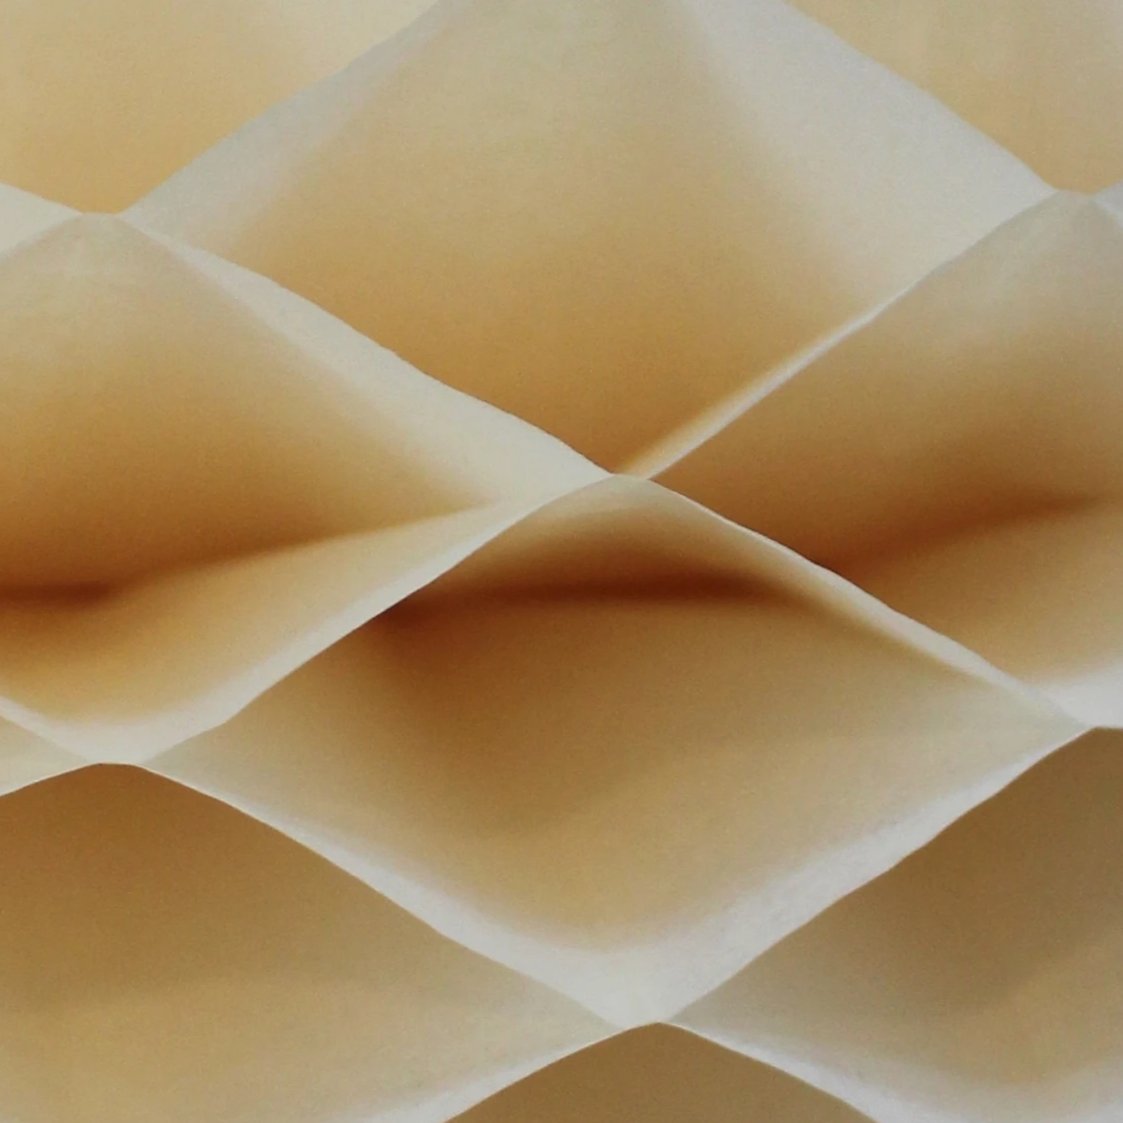 Honeycomb Paper made from kraft paper